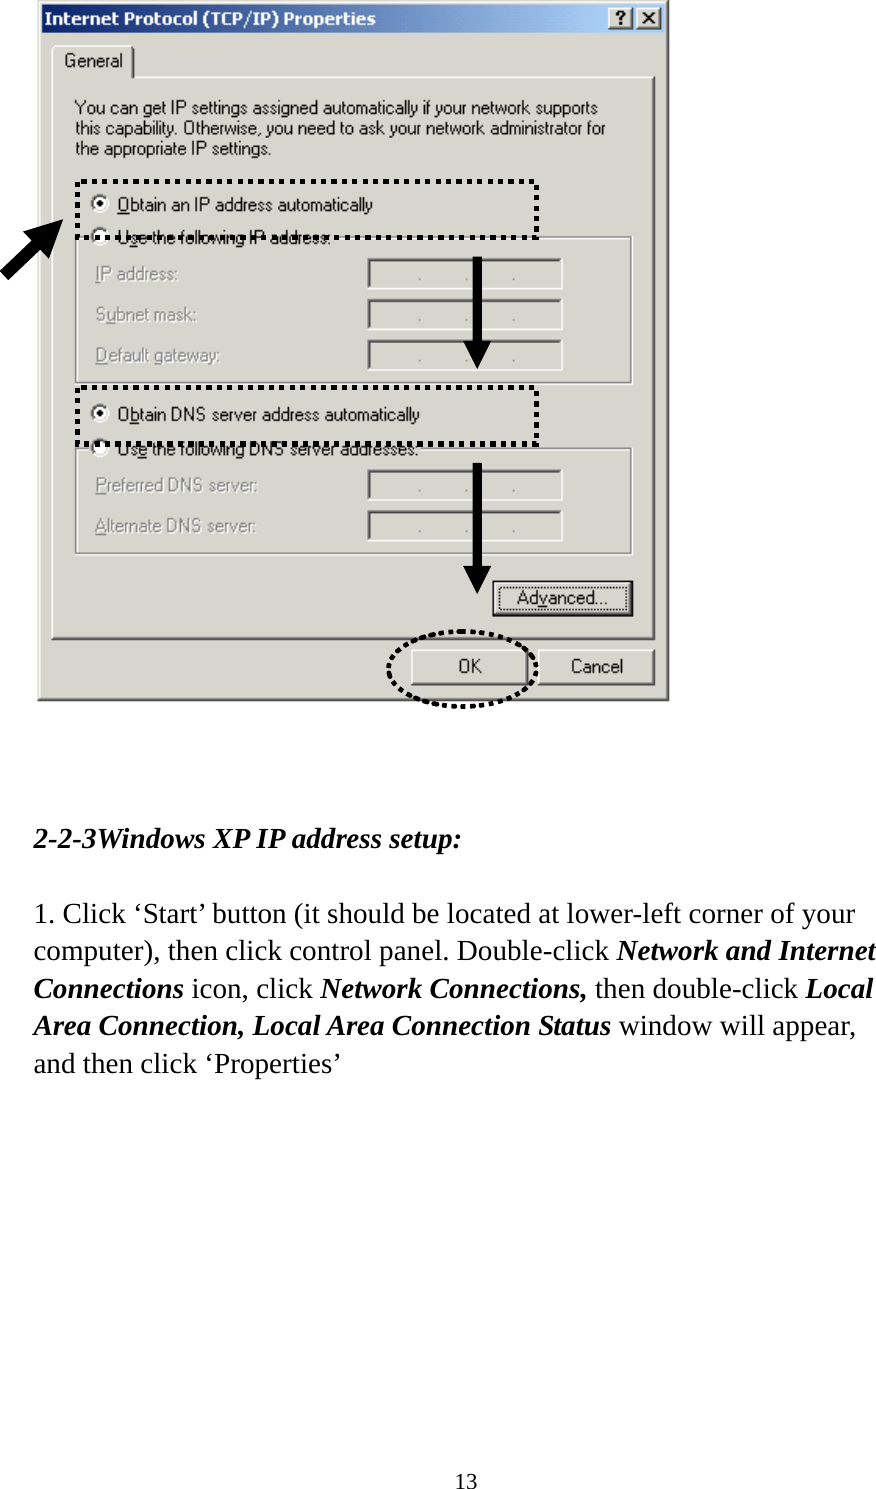 13     2-2-3Windows XP IP address setup:  1. Click ‘Start’ button (it should be located at lower-left corner of your computer), then click control panel. Double-click Network and Internet Connections icon, click Network Connections, then double-click Local Area Connection, Local Area Connection Status window will appear, and then click ‘Properties’  